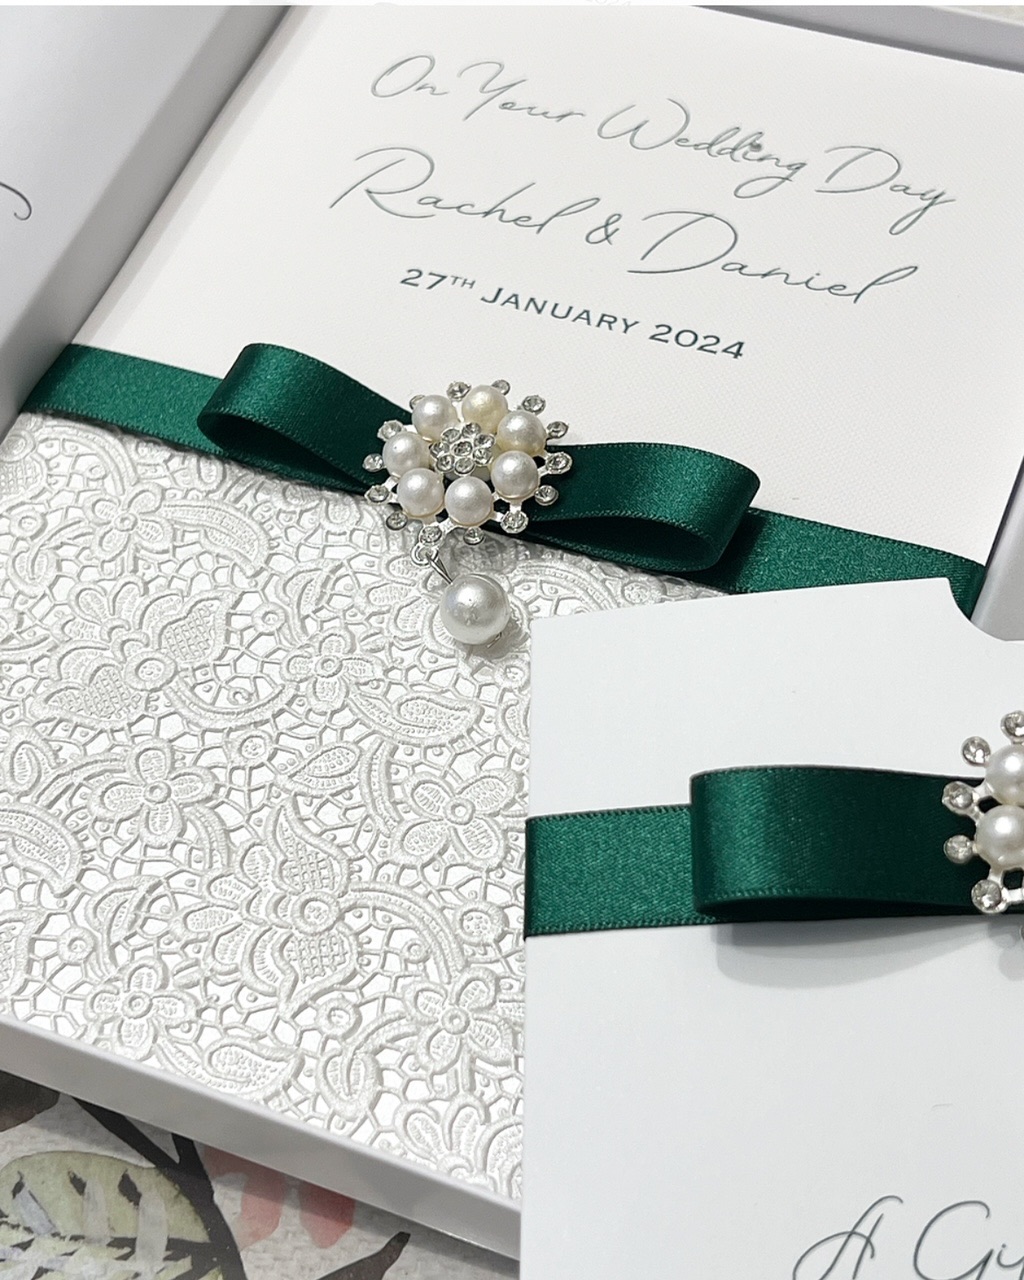 Emerald Wedding Day card with pearls